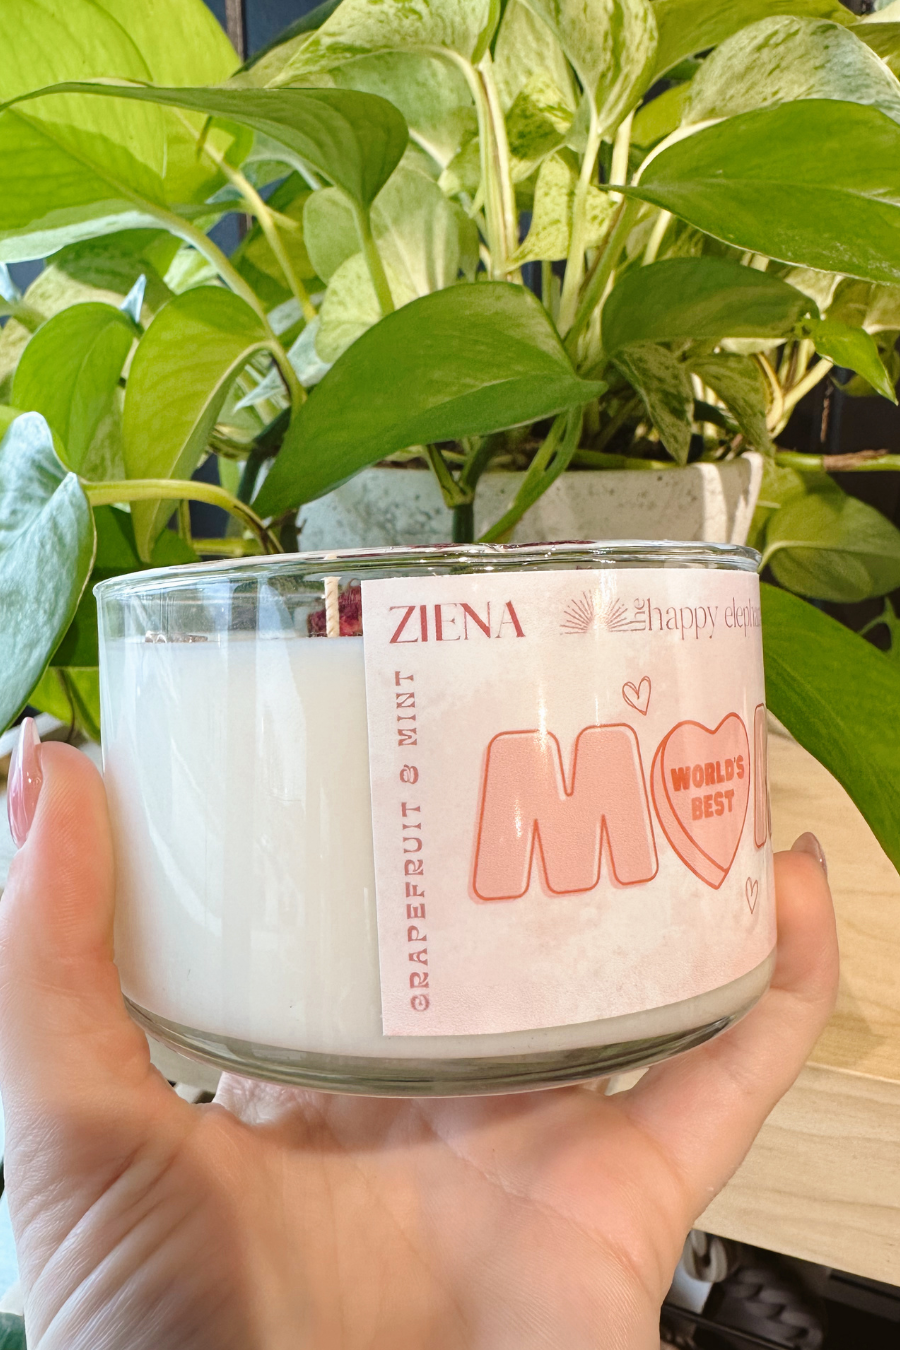 a closer look at the world's best mom candle 